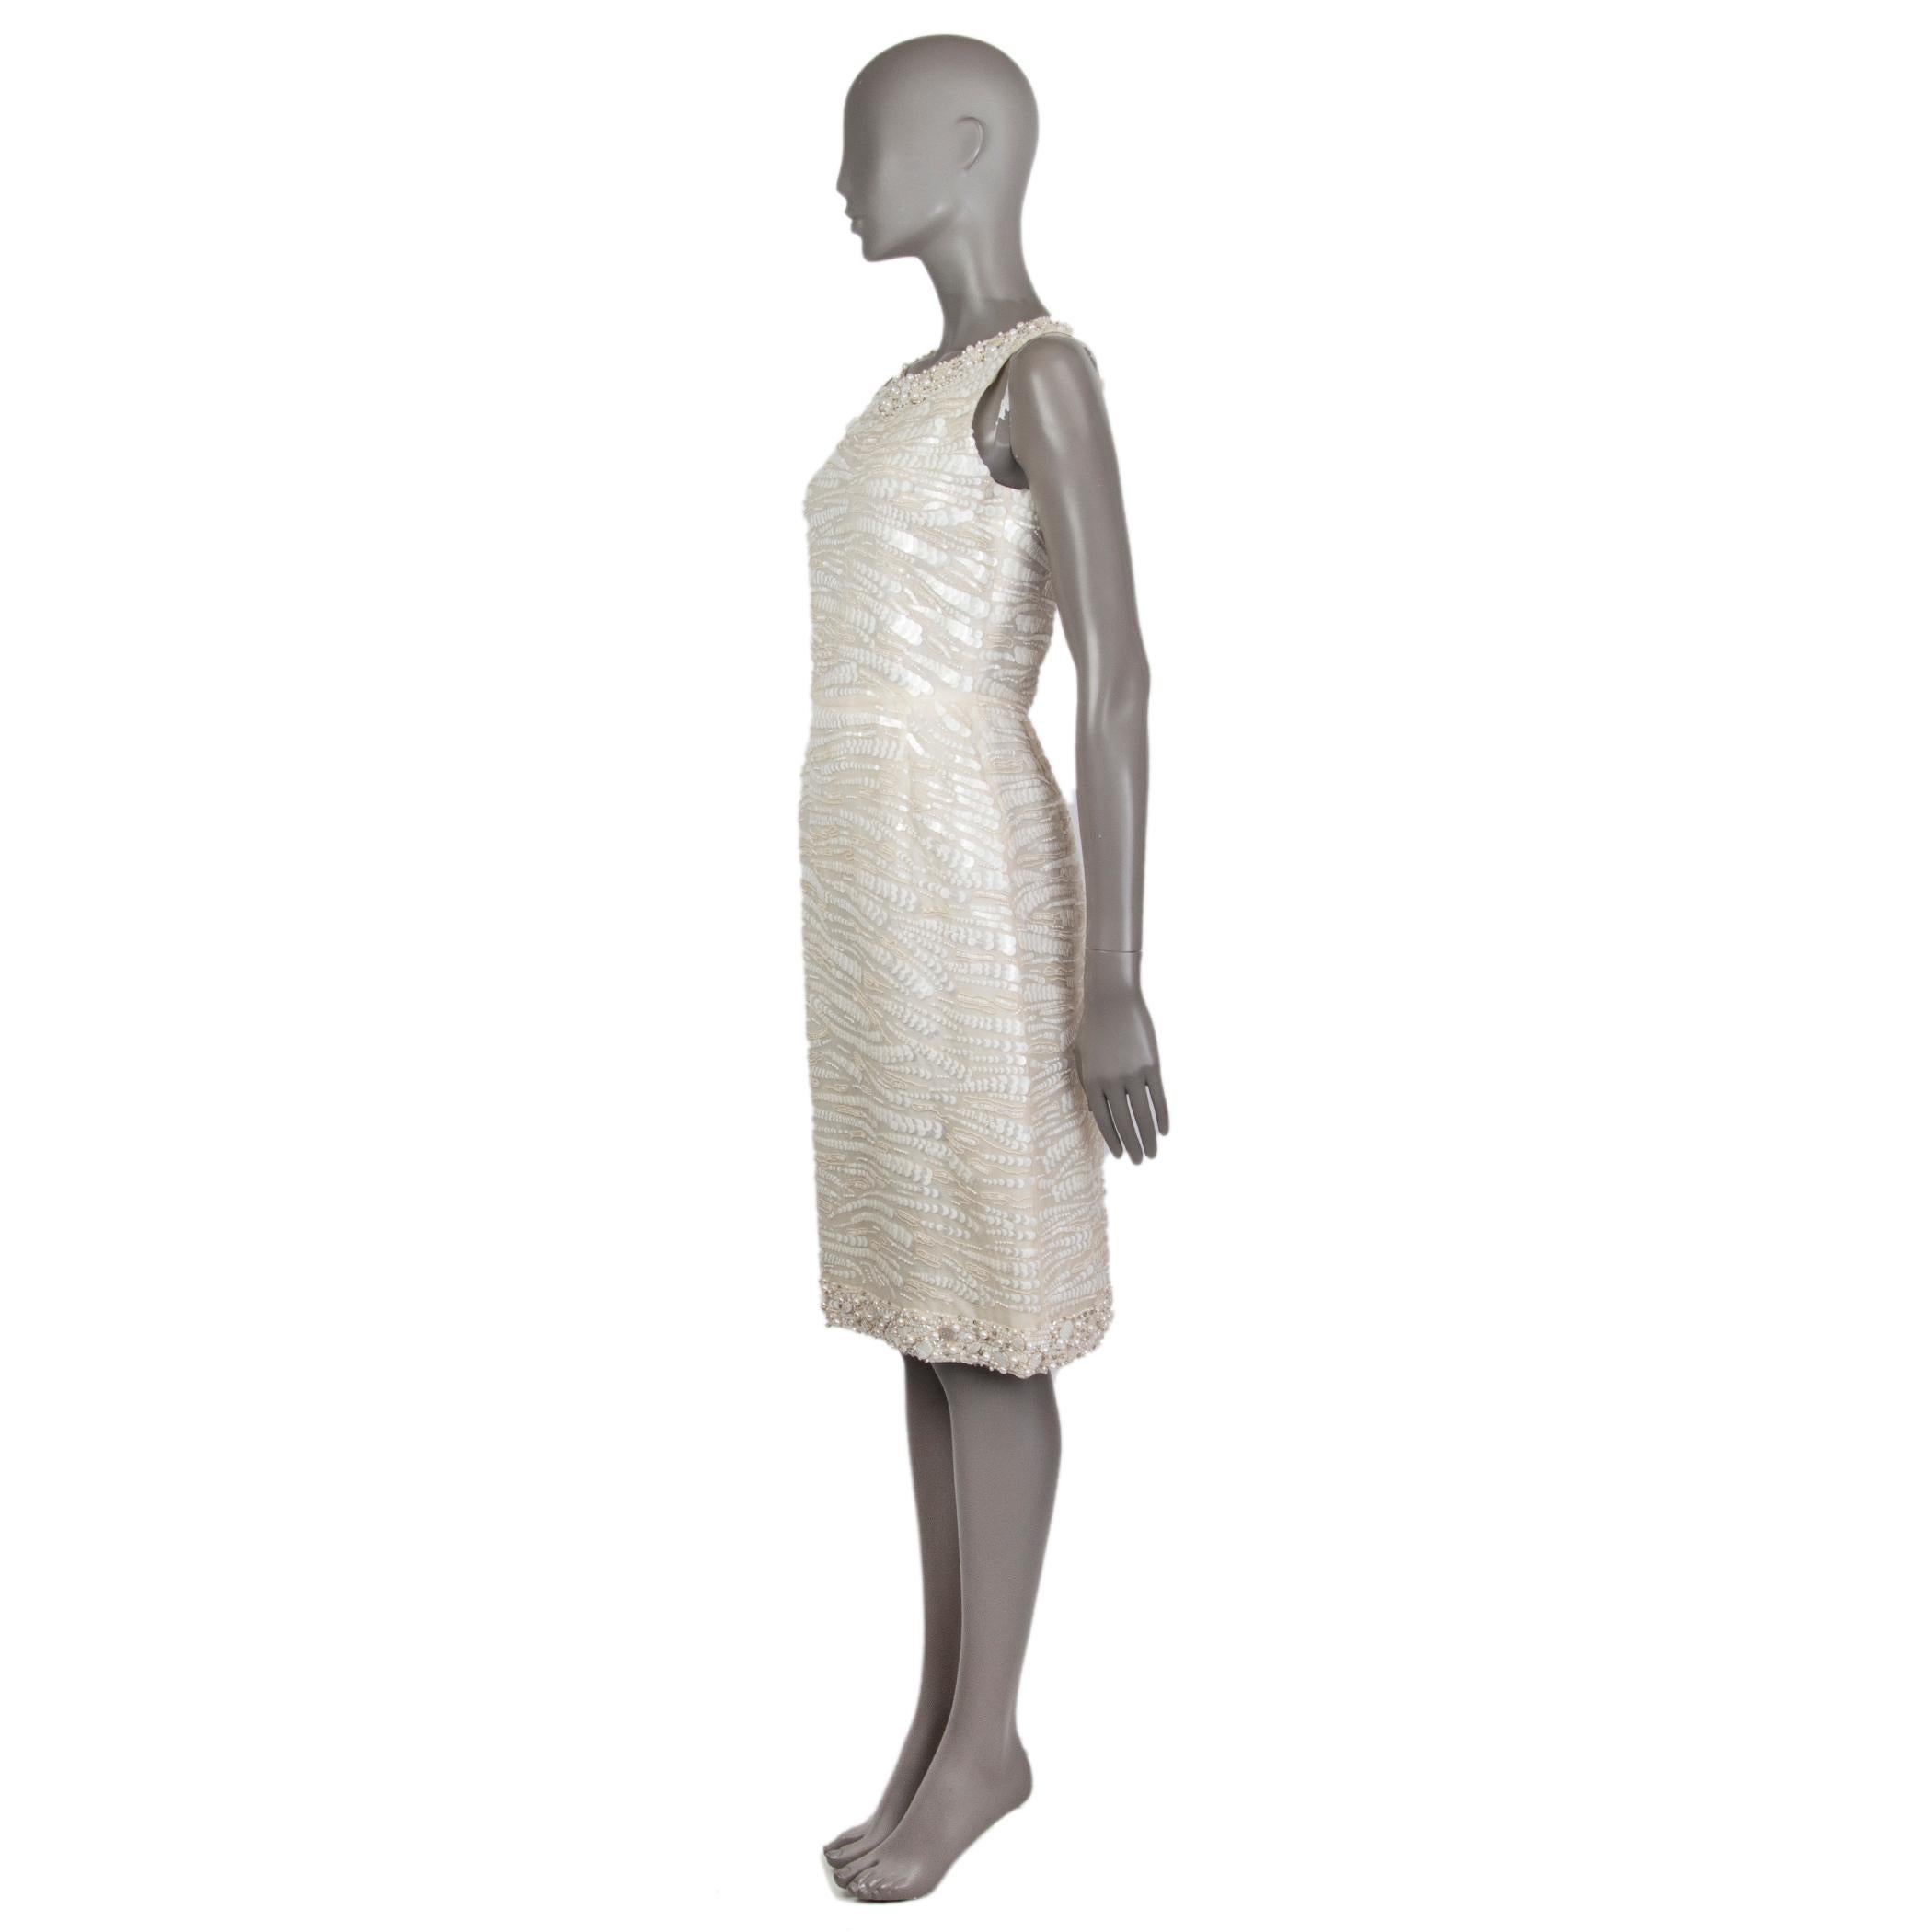 100% authentic Oscar De La Renta sleeveless sequins dress in champaign, white, silver tone silk (100%) with an embroidered round neck. Closes on the back with a concealed zipper. Lined in silk (100%). Has been worn and is in excellent condition.